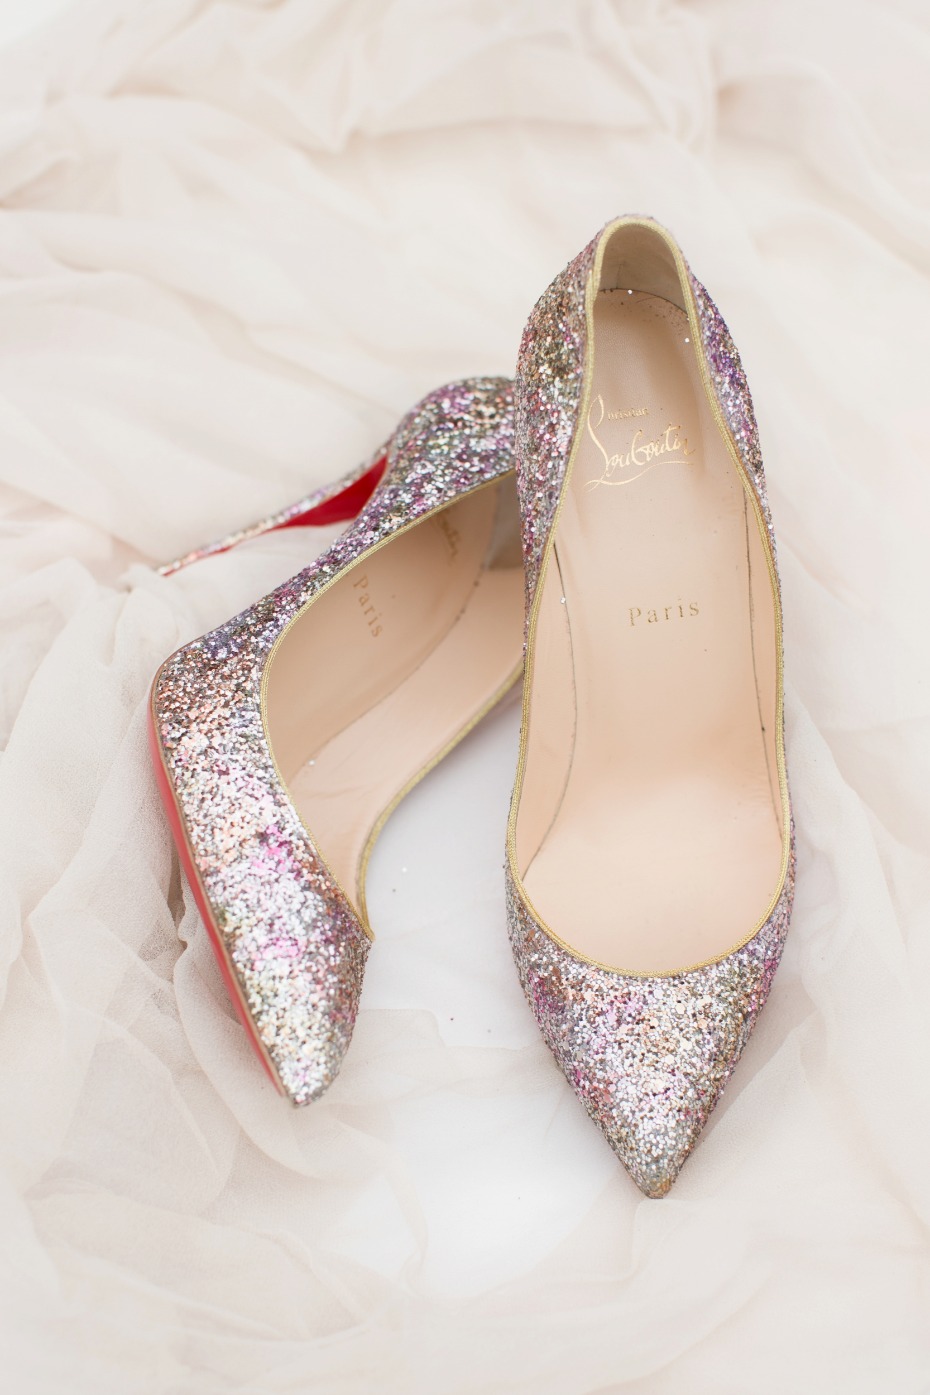 Sparkly Louboutin pumps for the bride